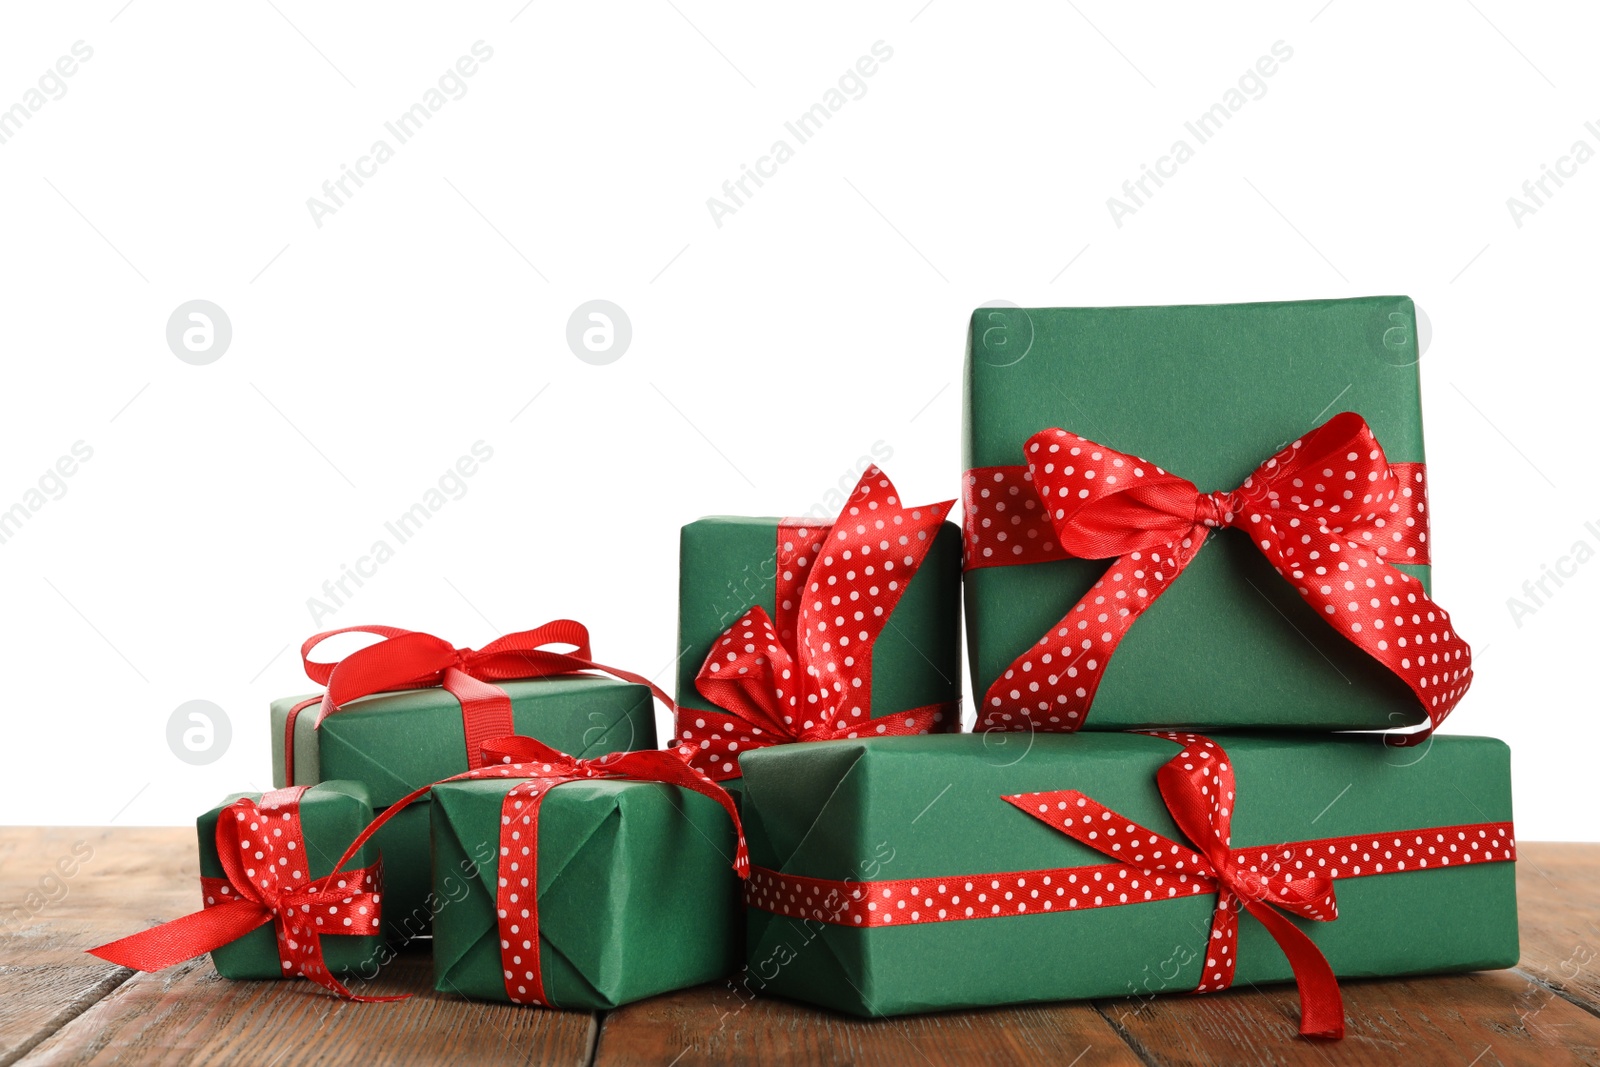 Photo of Many Christmas gifts on wooden table against white background